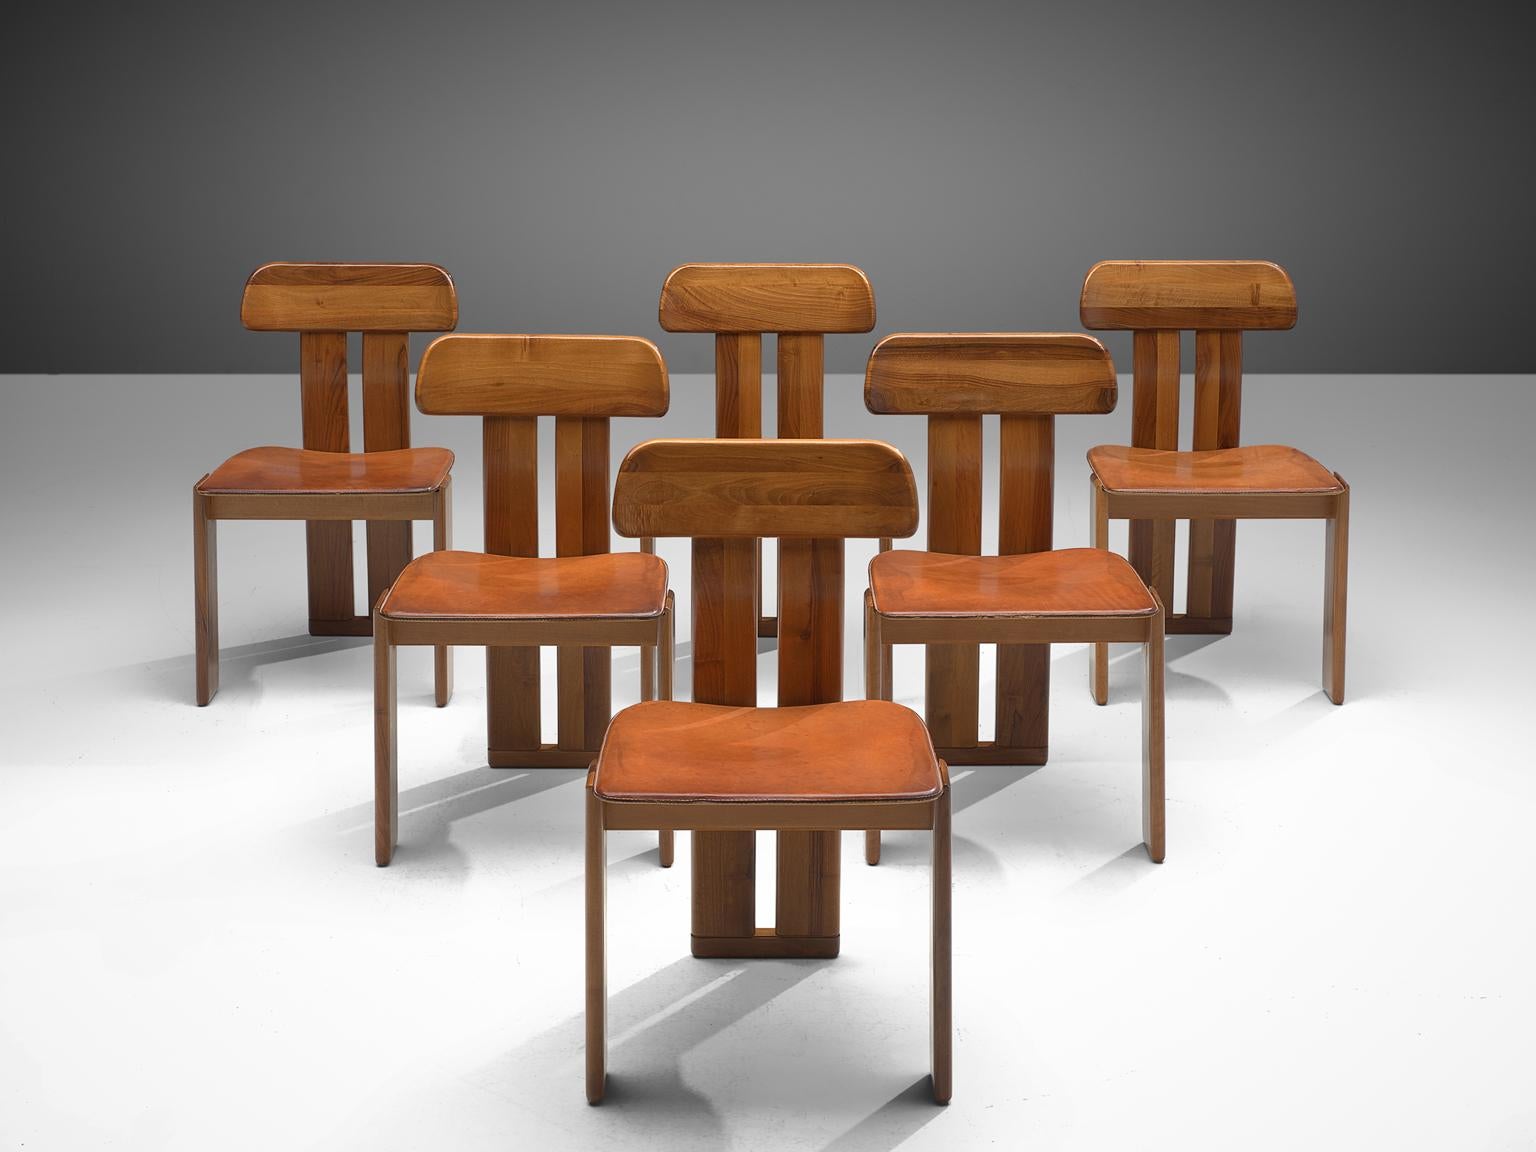 Sapporo for Girgi Mobil, set of 6 dining chairs, Italian walnut and cognac leather, Italy, 1970s.

Set of sculptural chairs that feature wonderful backrests, consisting of two vertical slats distanced from each other. At the bottom and top these